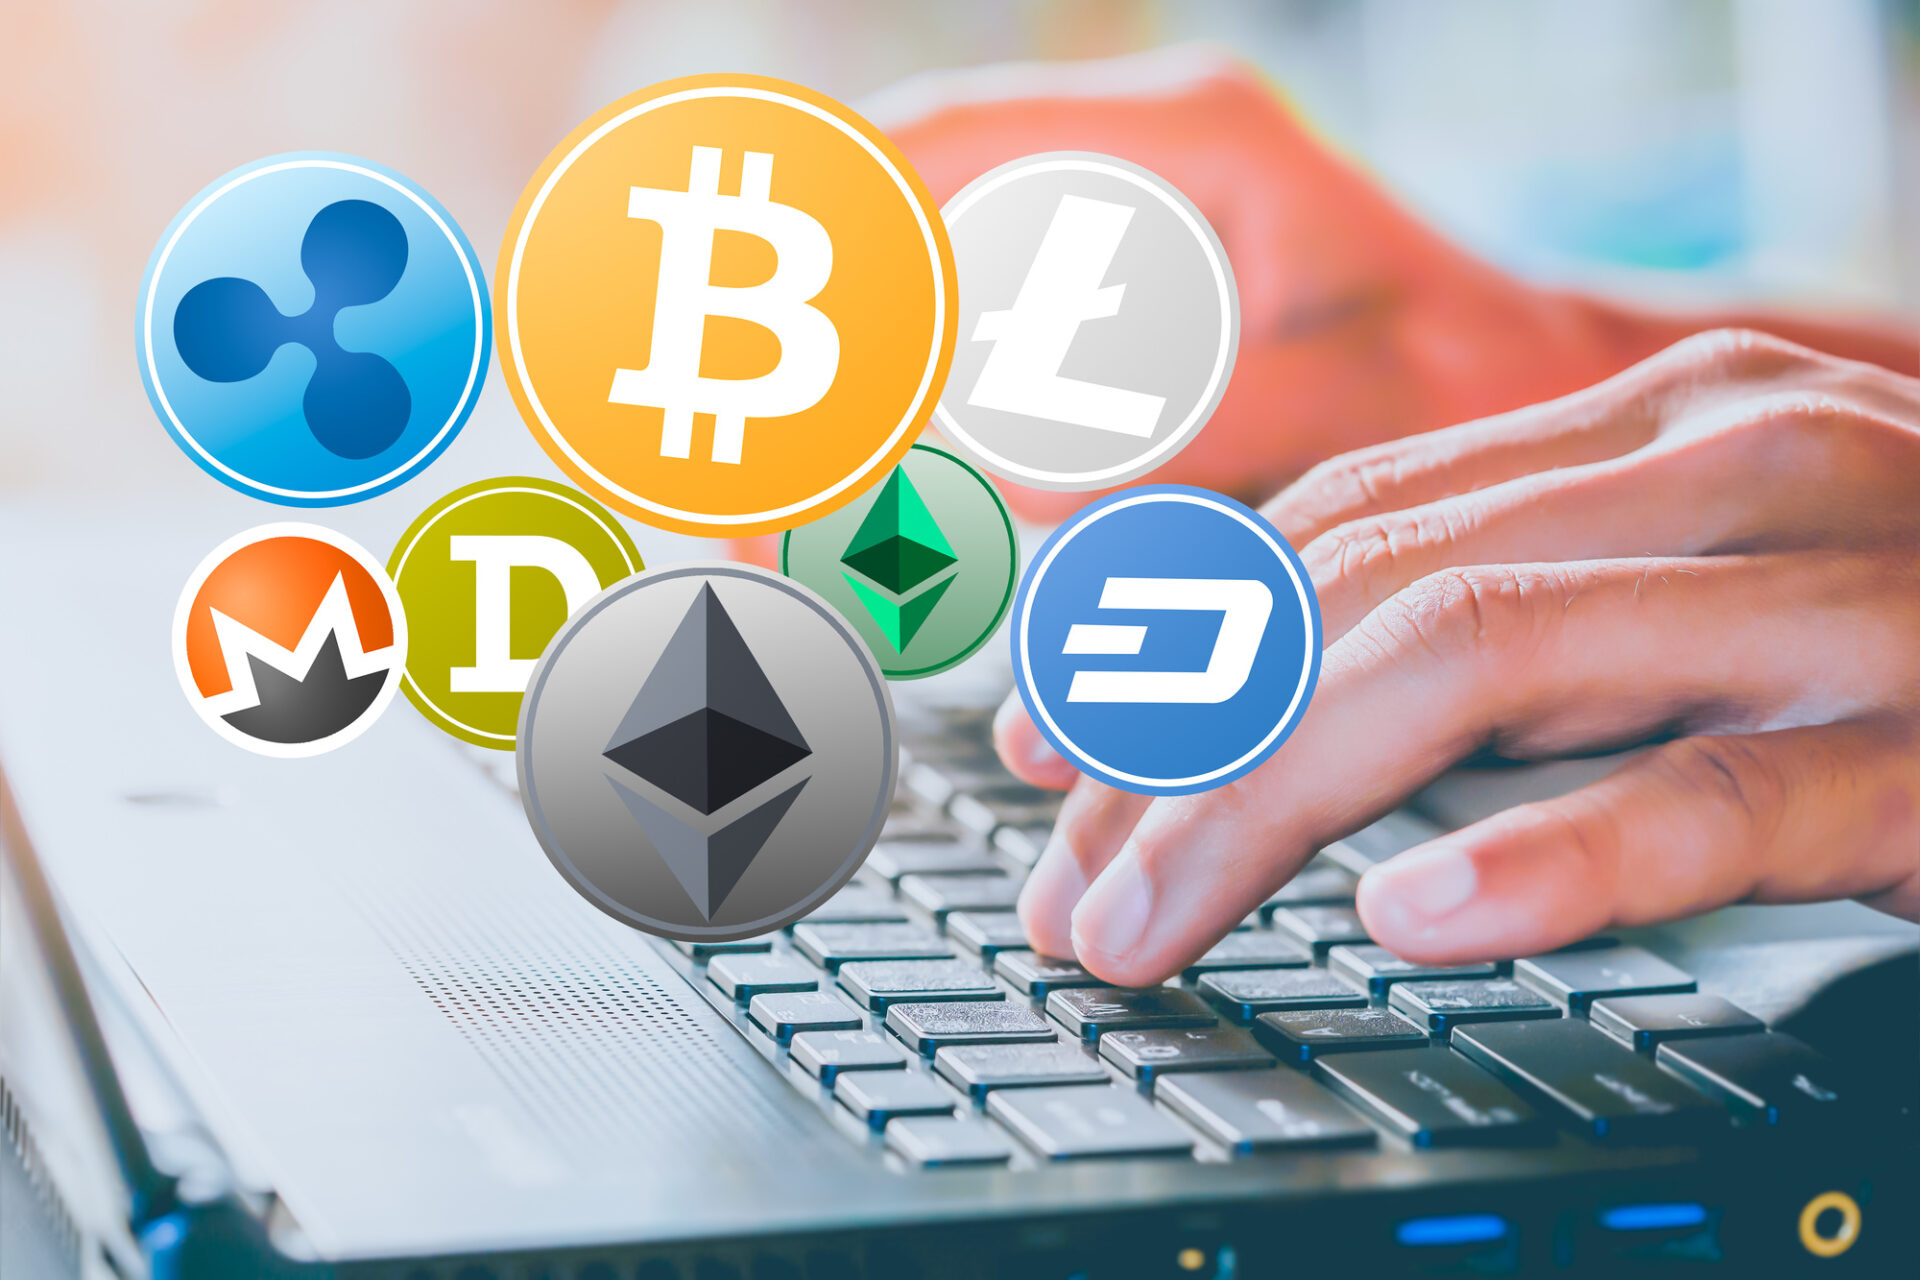 The Ultimate Guide to the Most Popular Cryptocurrencies